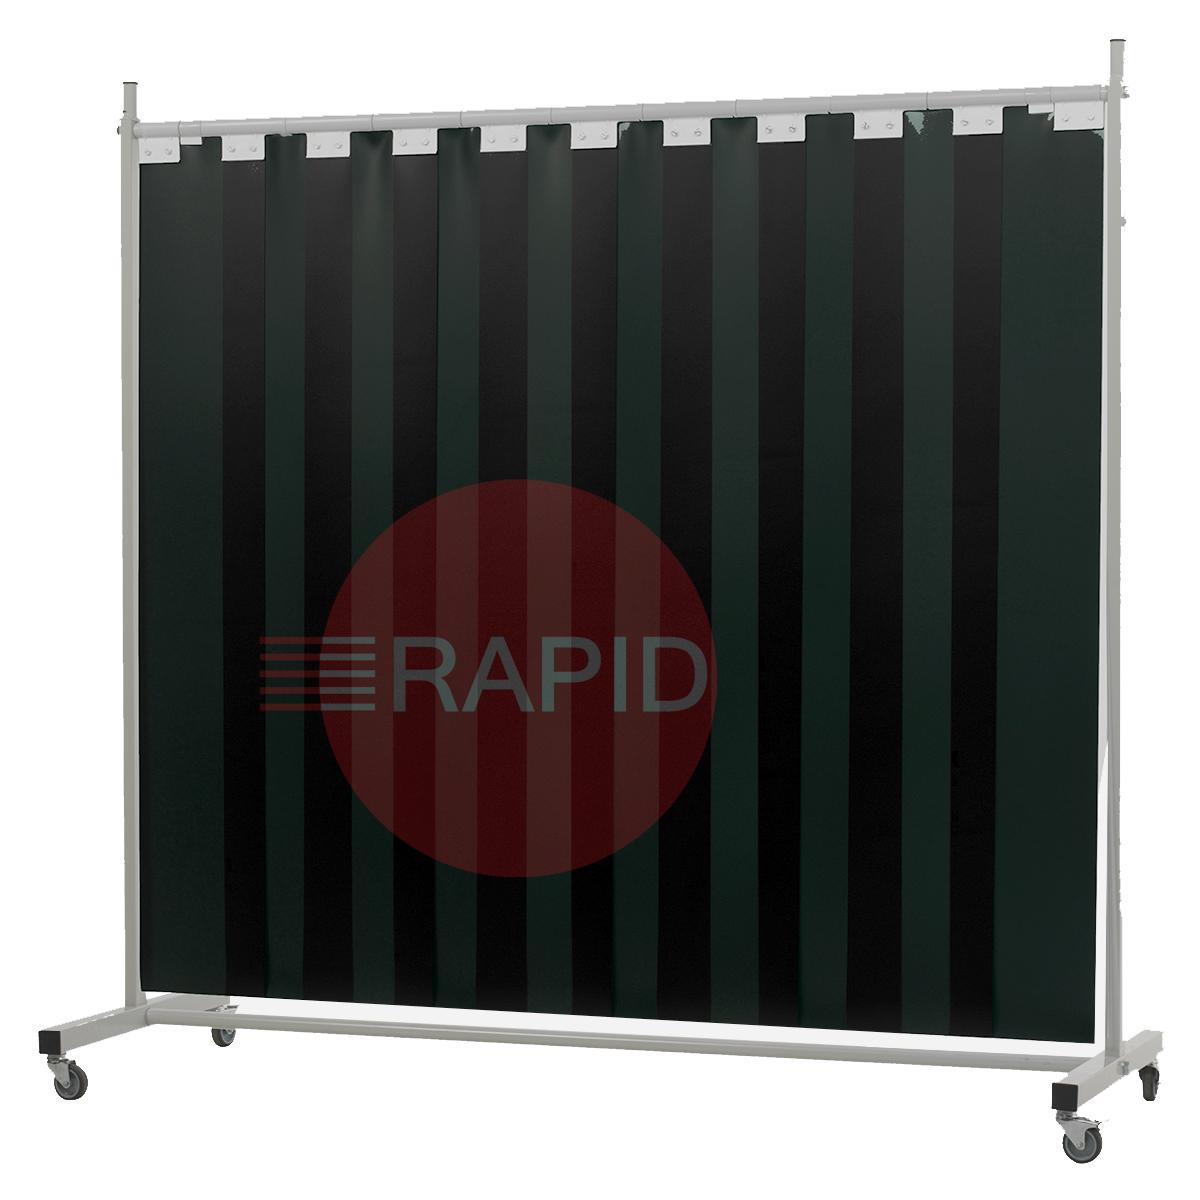 36.32.26  CEPRO Robusto Single Welding Screen with Green-6 Strips - 2.2m Wide x 2.1m High, Approved EN 25980